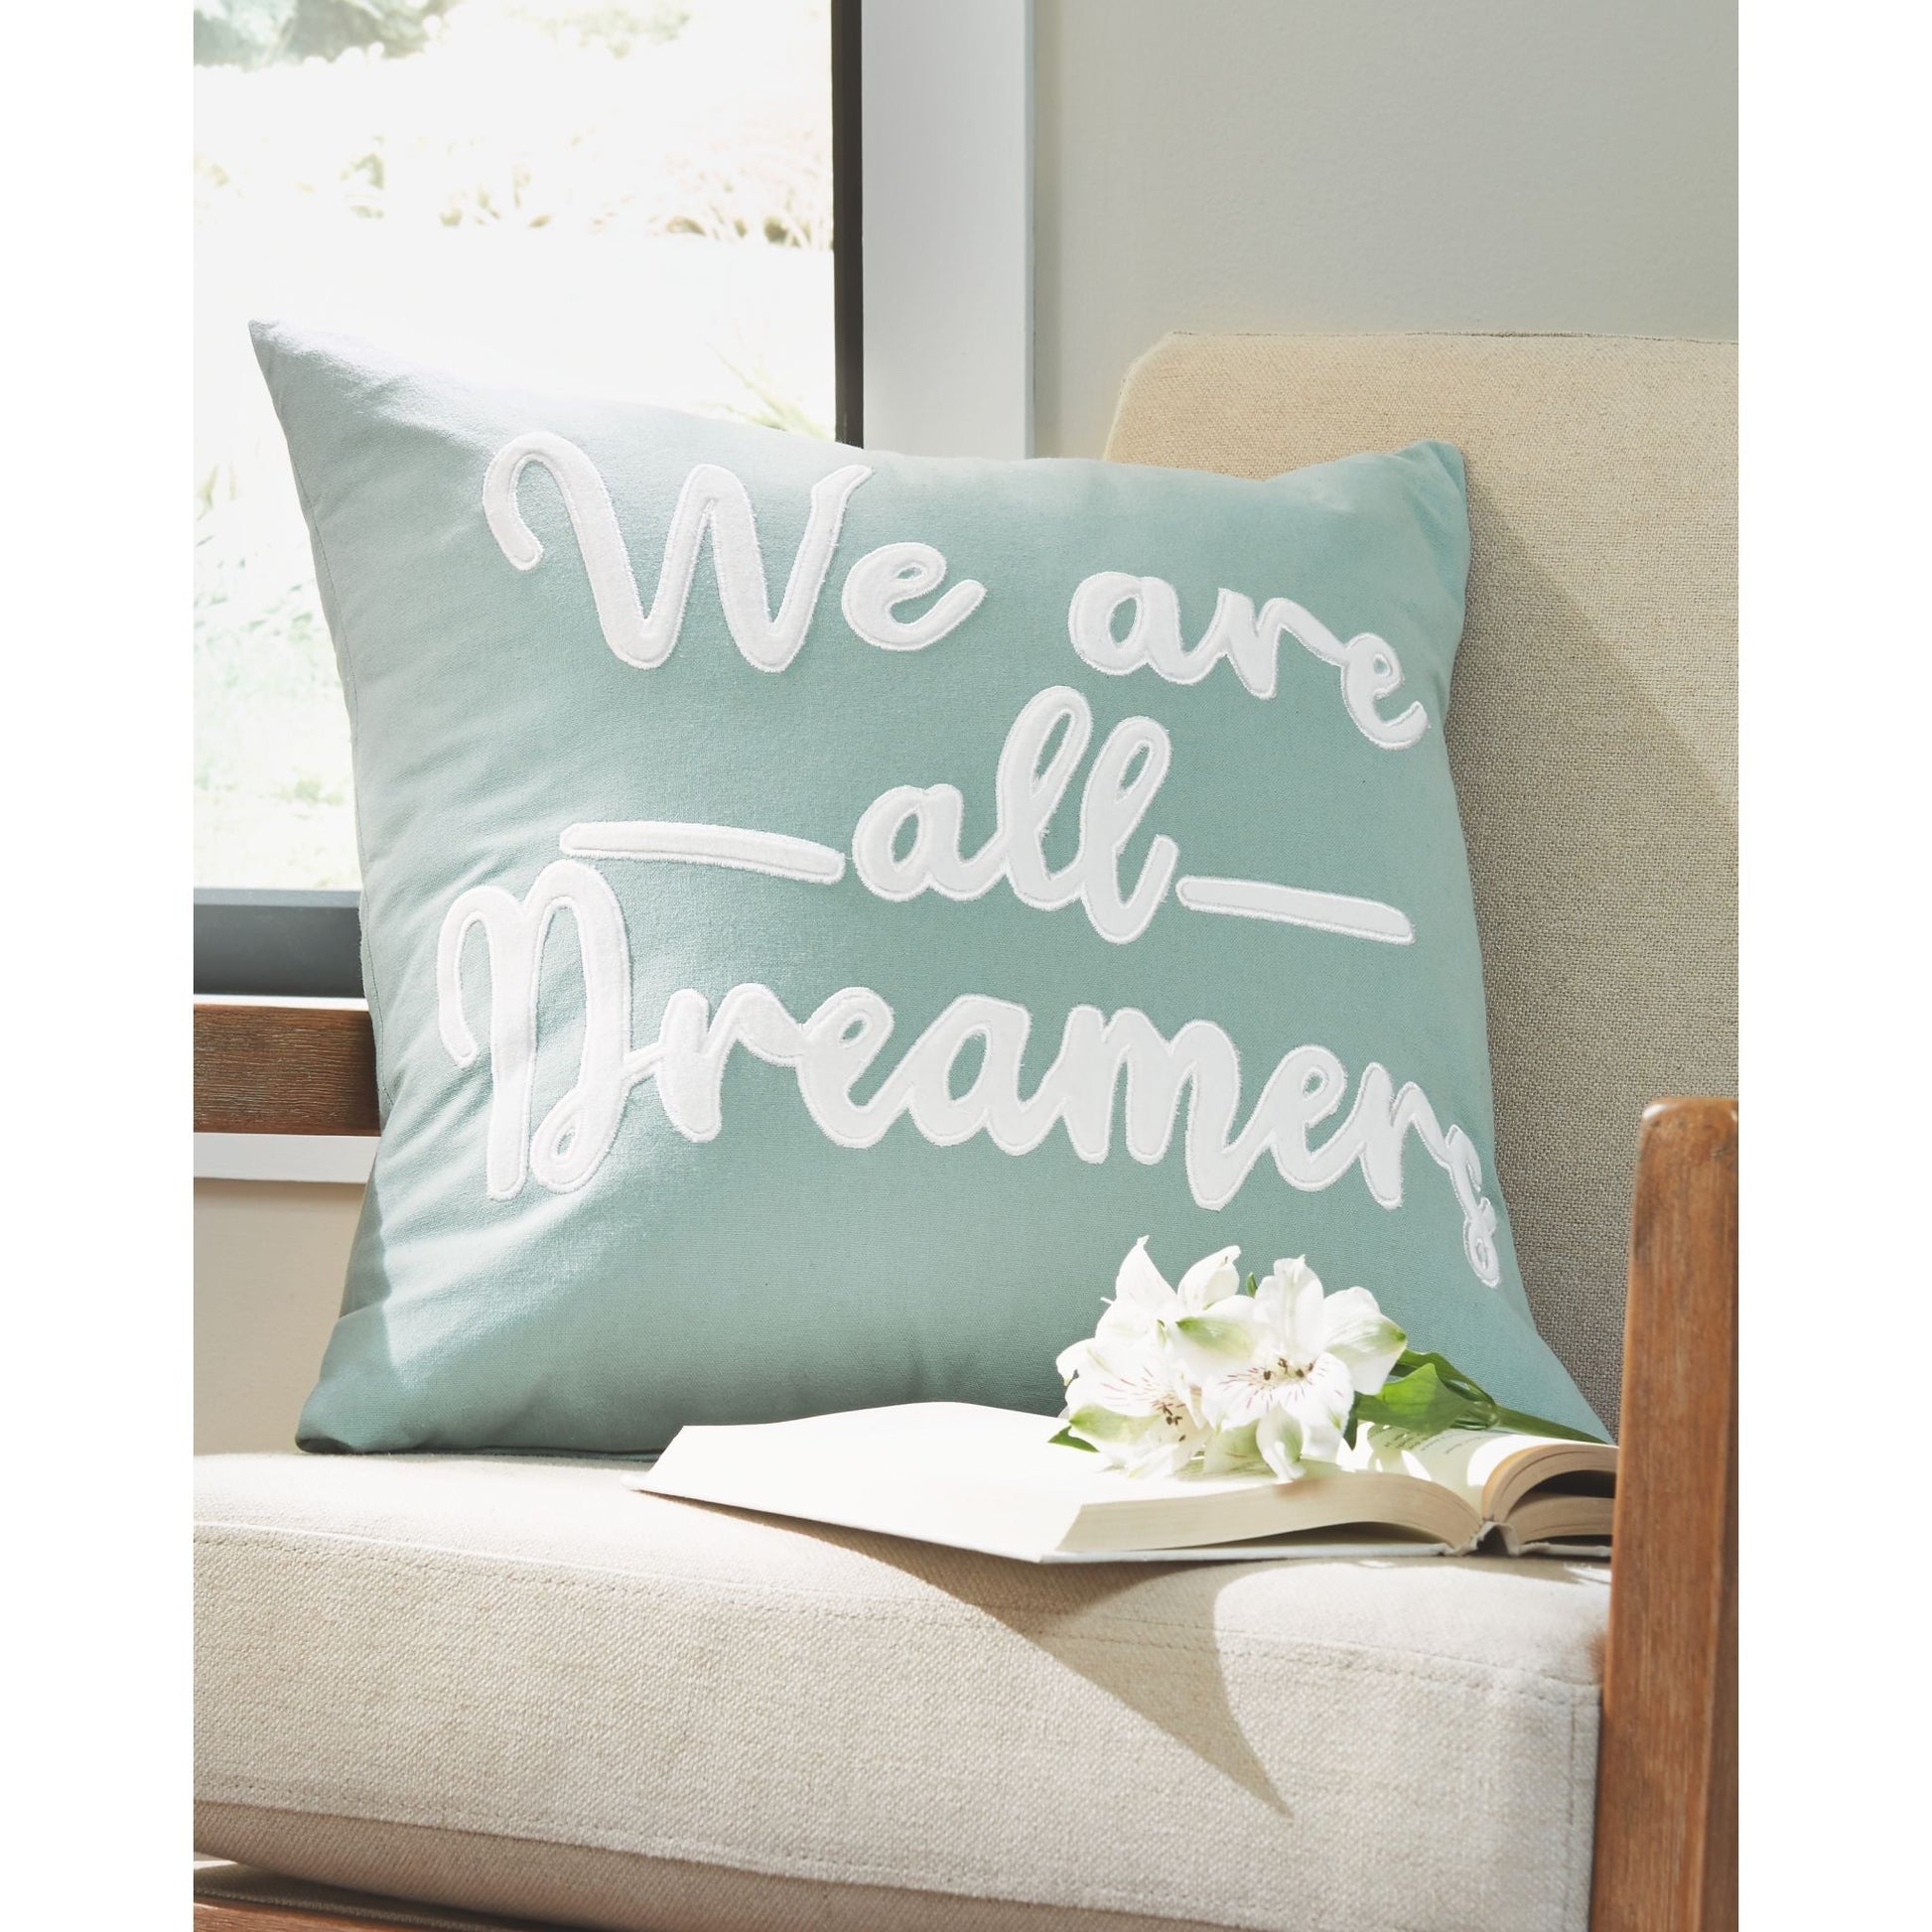 Dreamers Accent Pillow 20.00"